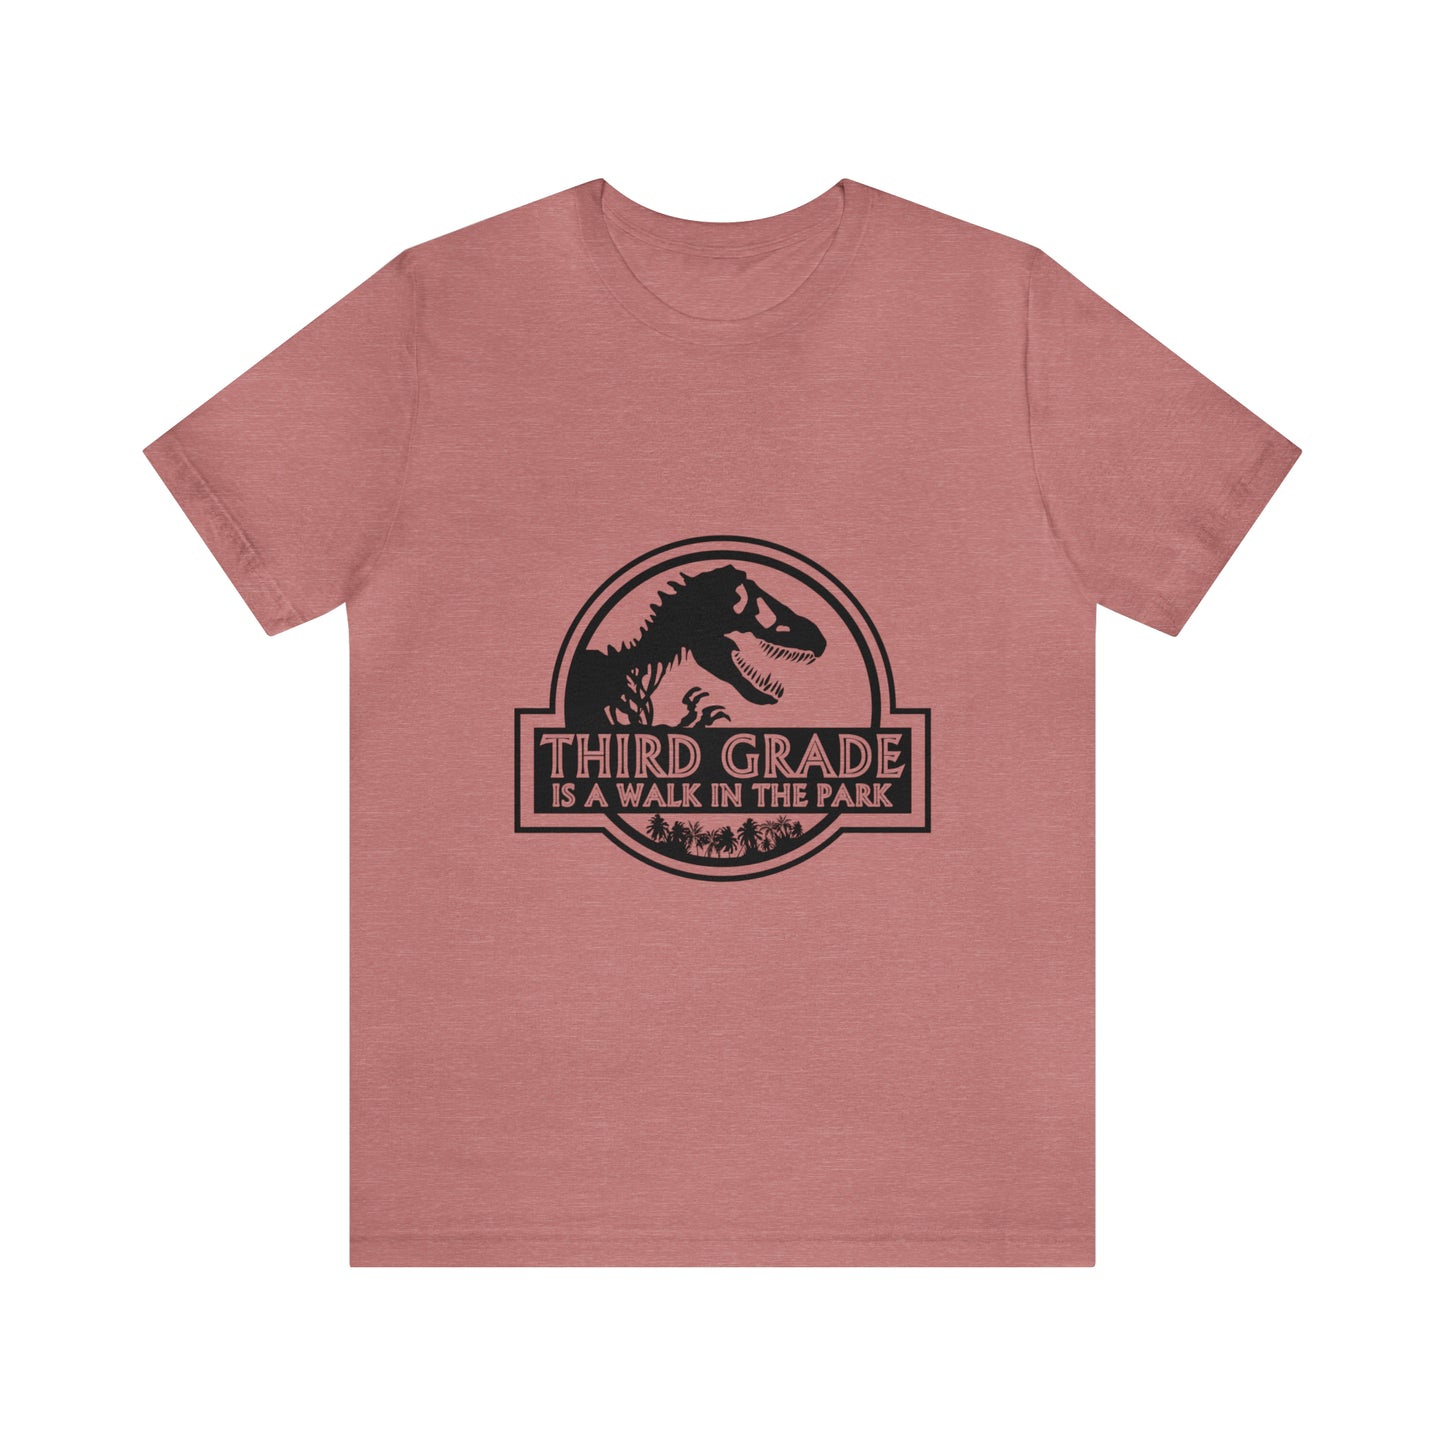 Third Grade is a Walk in the Park  tee